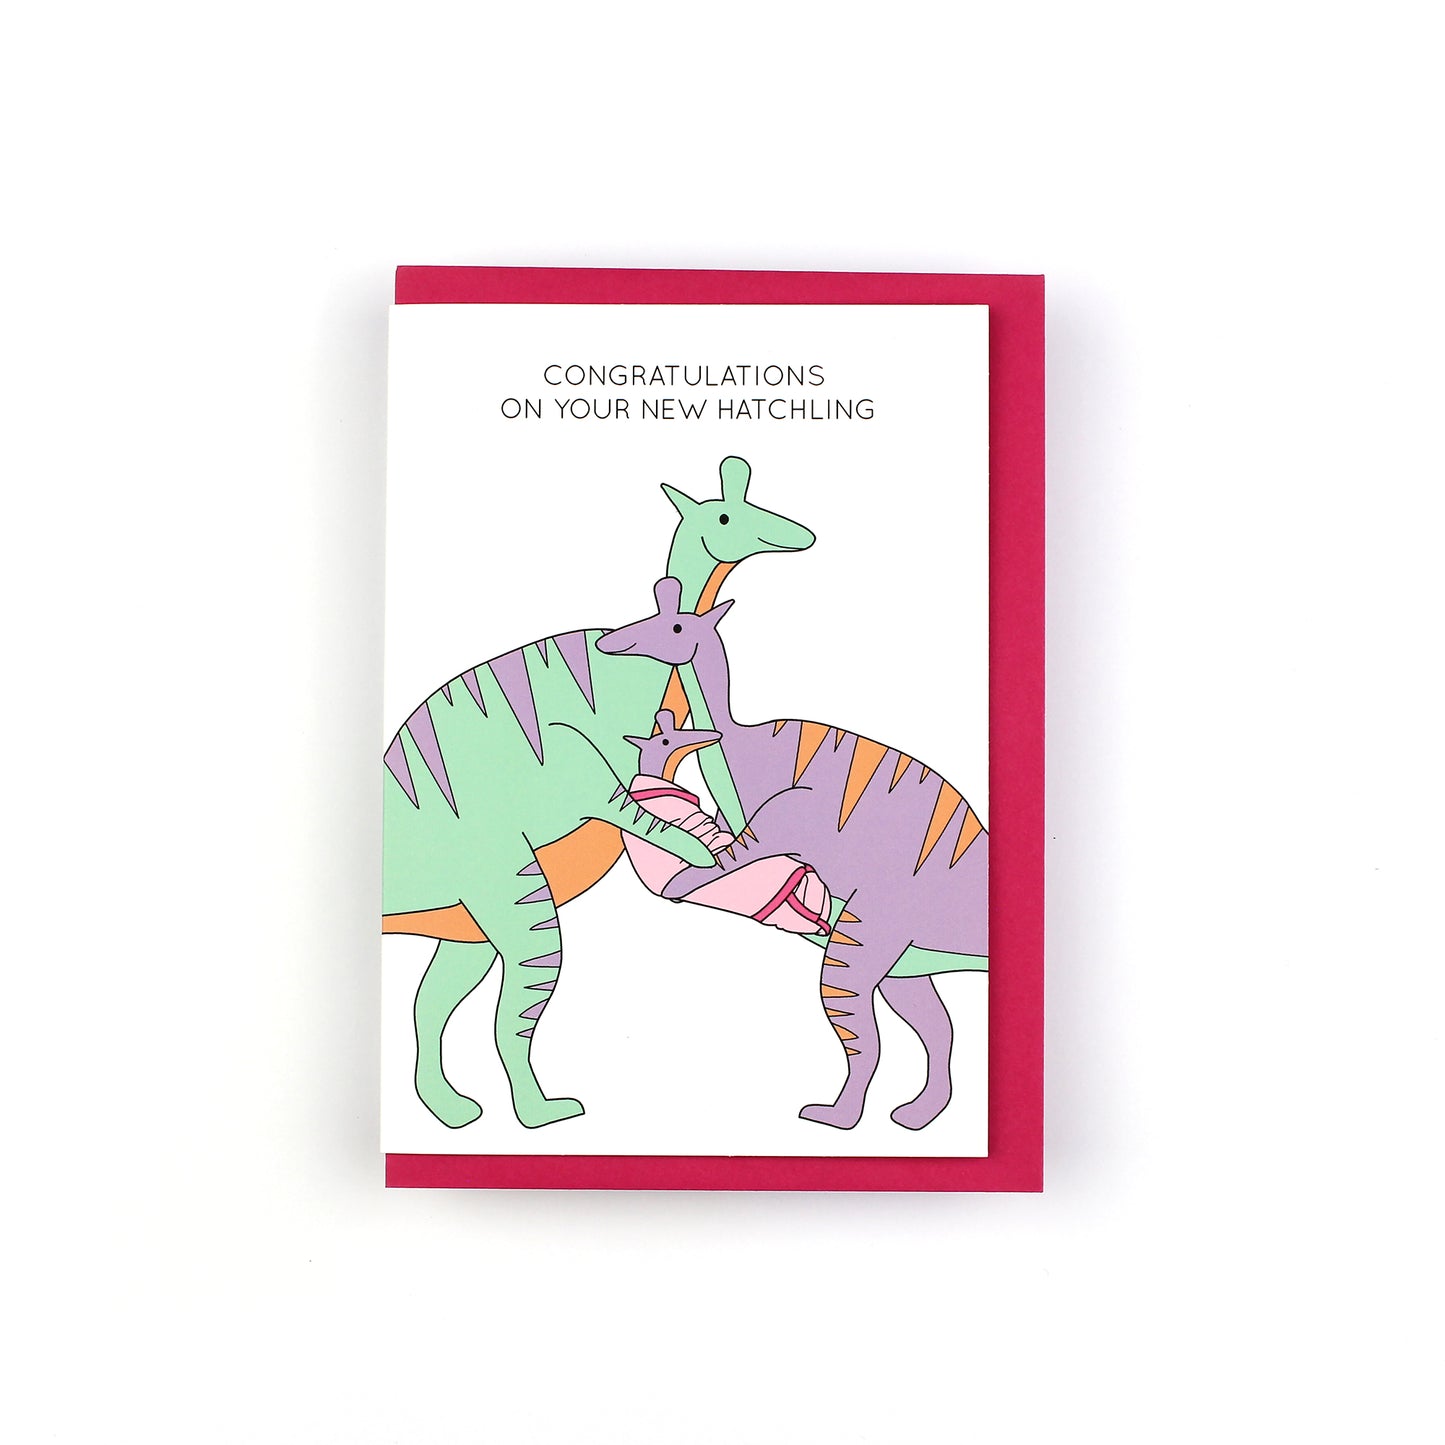 Congratulations on Your New Hatchling Greeting Card with pink envelope